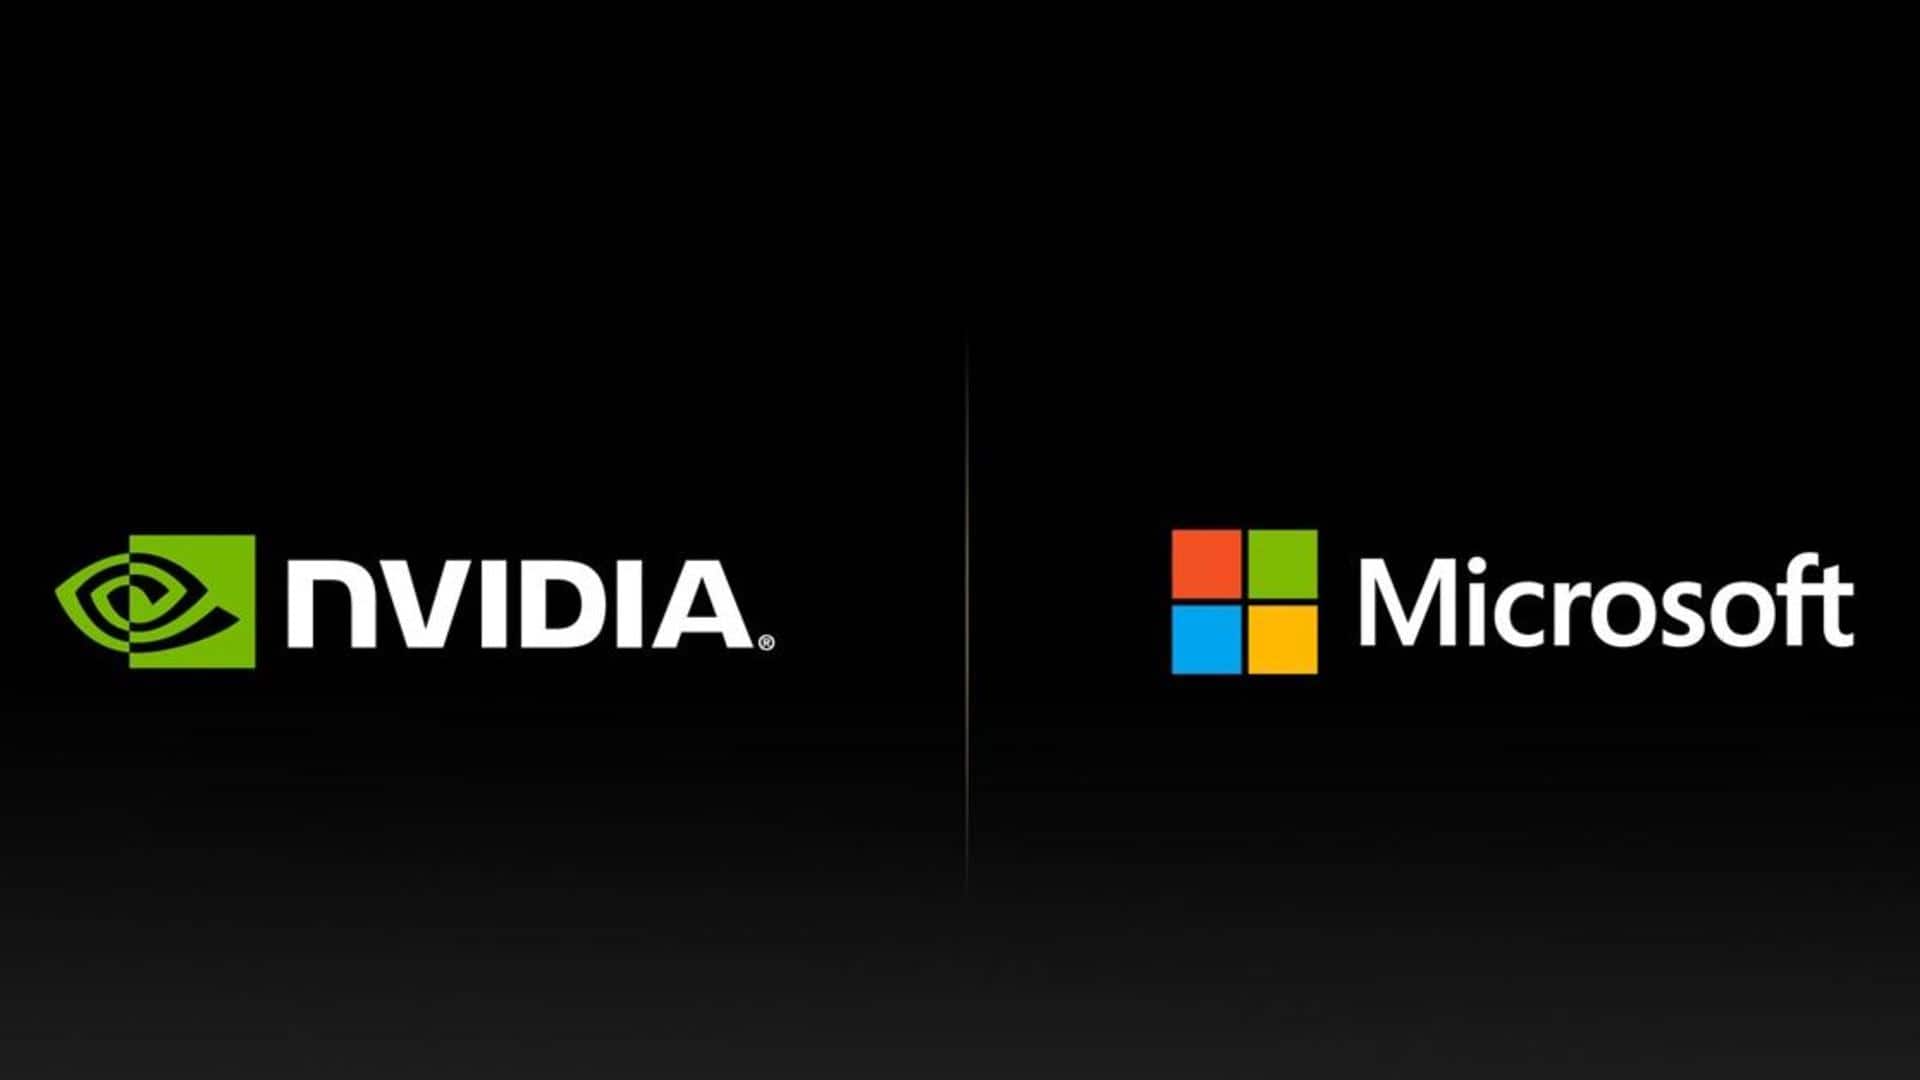 Microsoft and NVIDIA join forces to enhance enterprise AI efforts